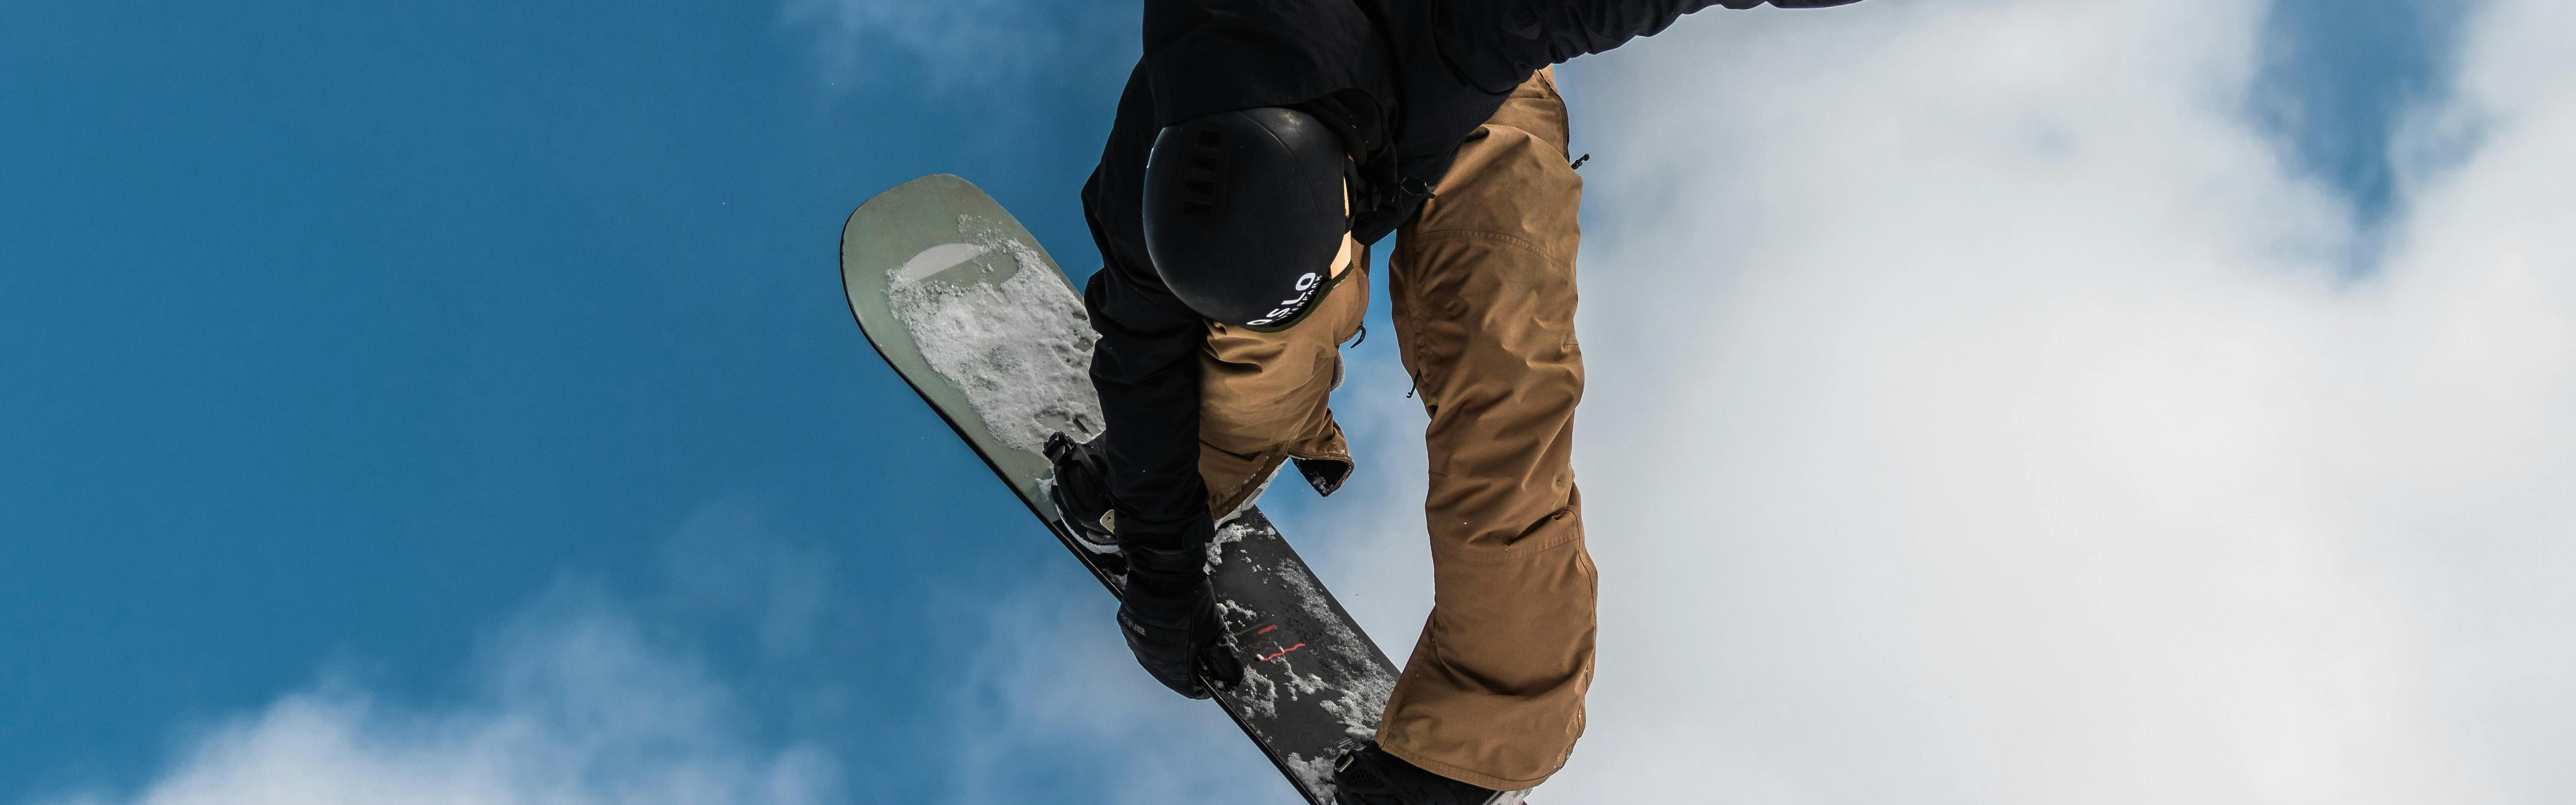 A snowboarder in a black jacket and brown pants flying through the air against the blue sky holding onto his snowboard while executing a jump trick.